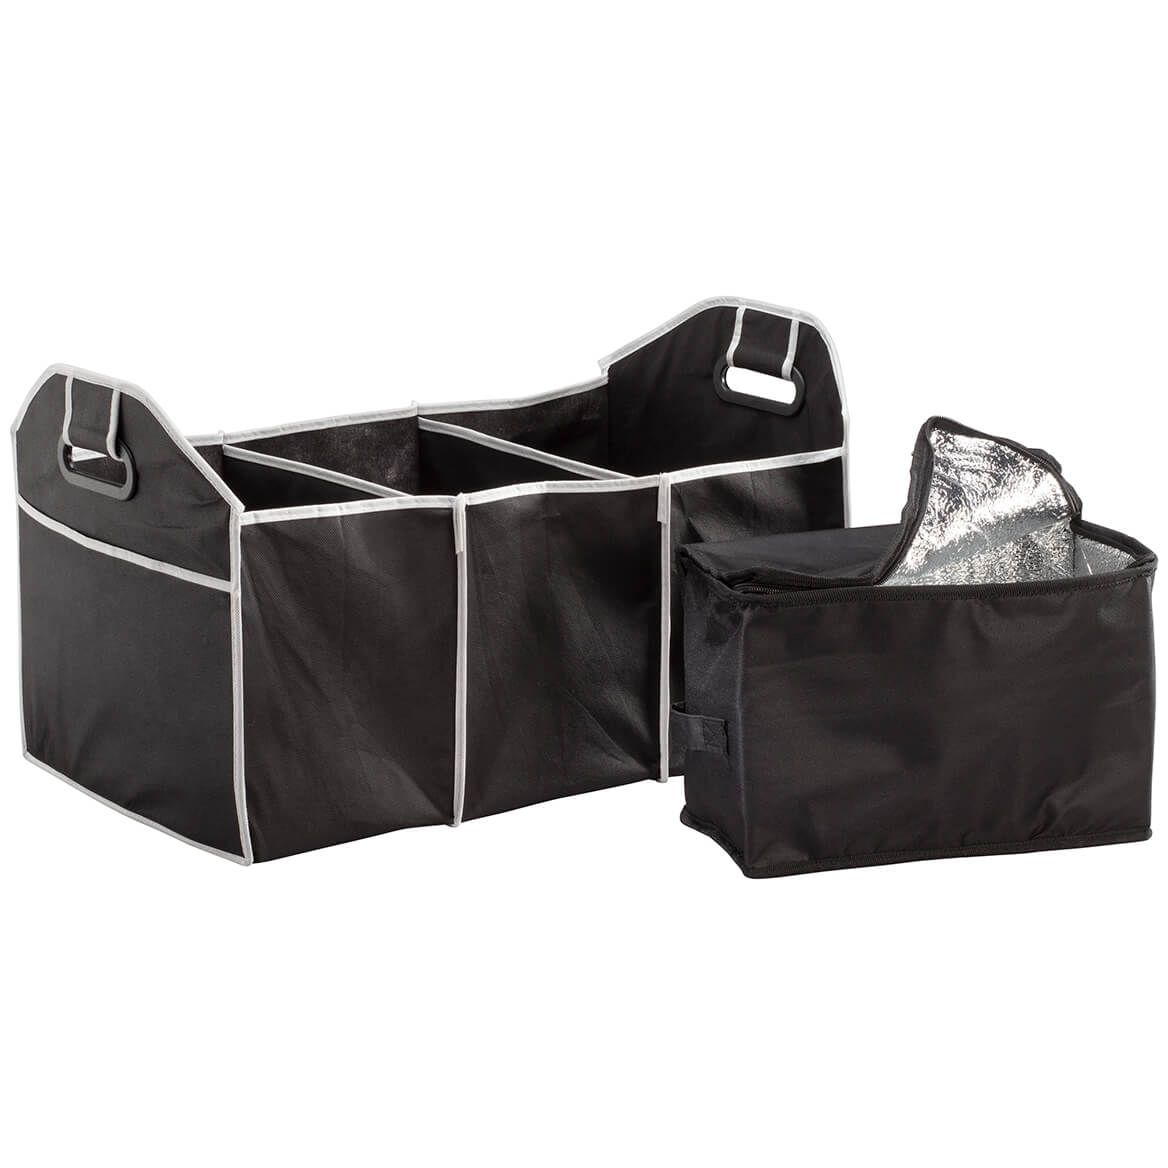 Collapsible Trunk Organizer + '-' + 351474